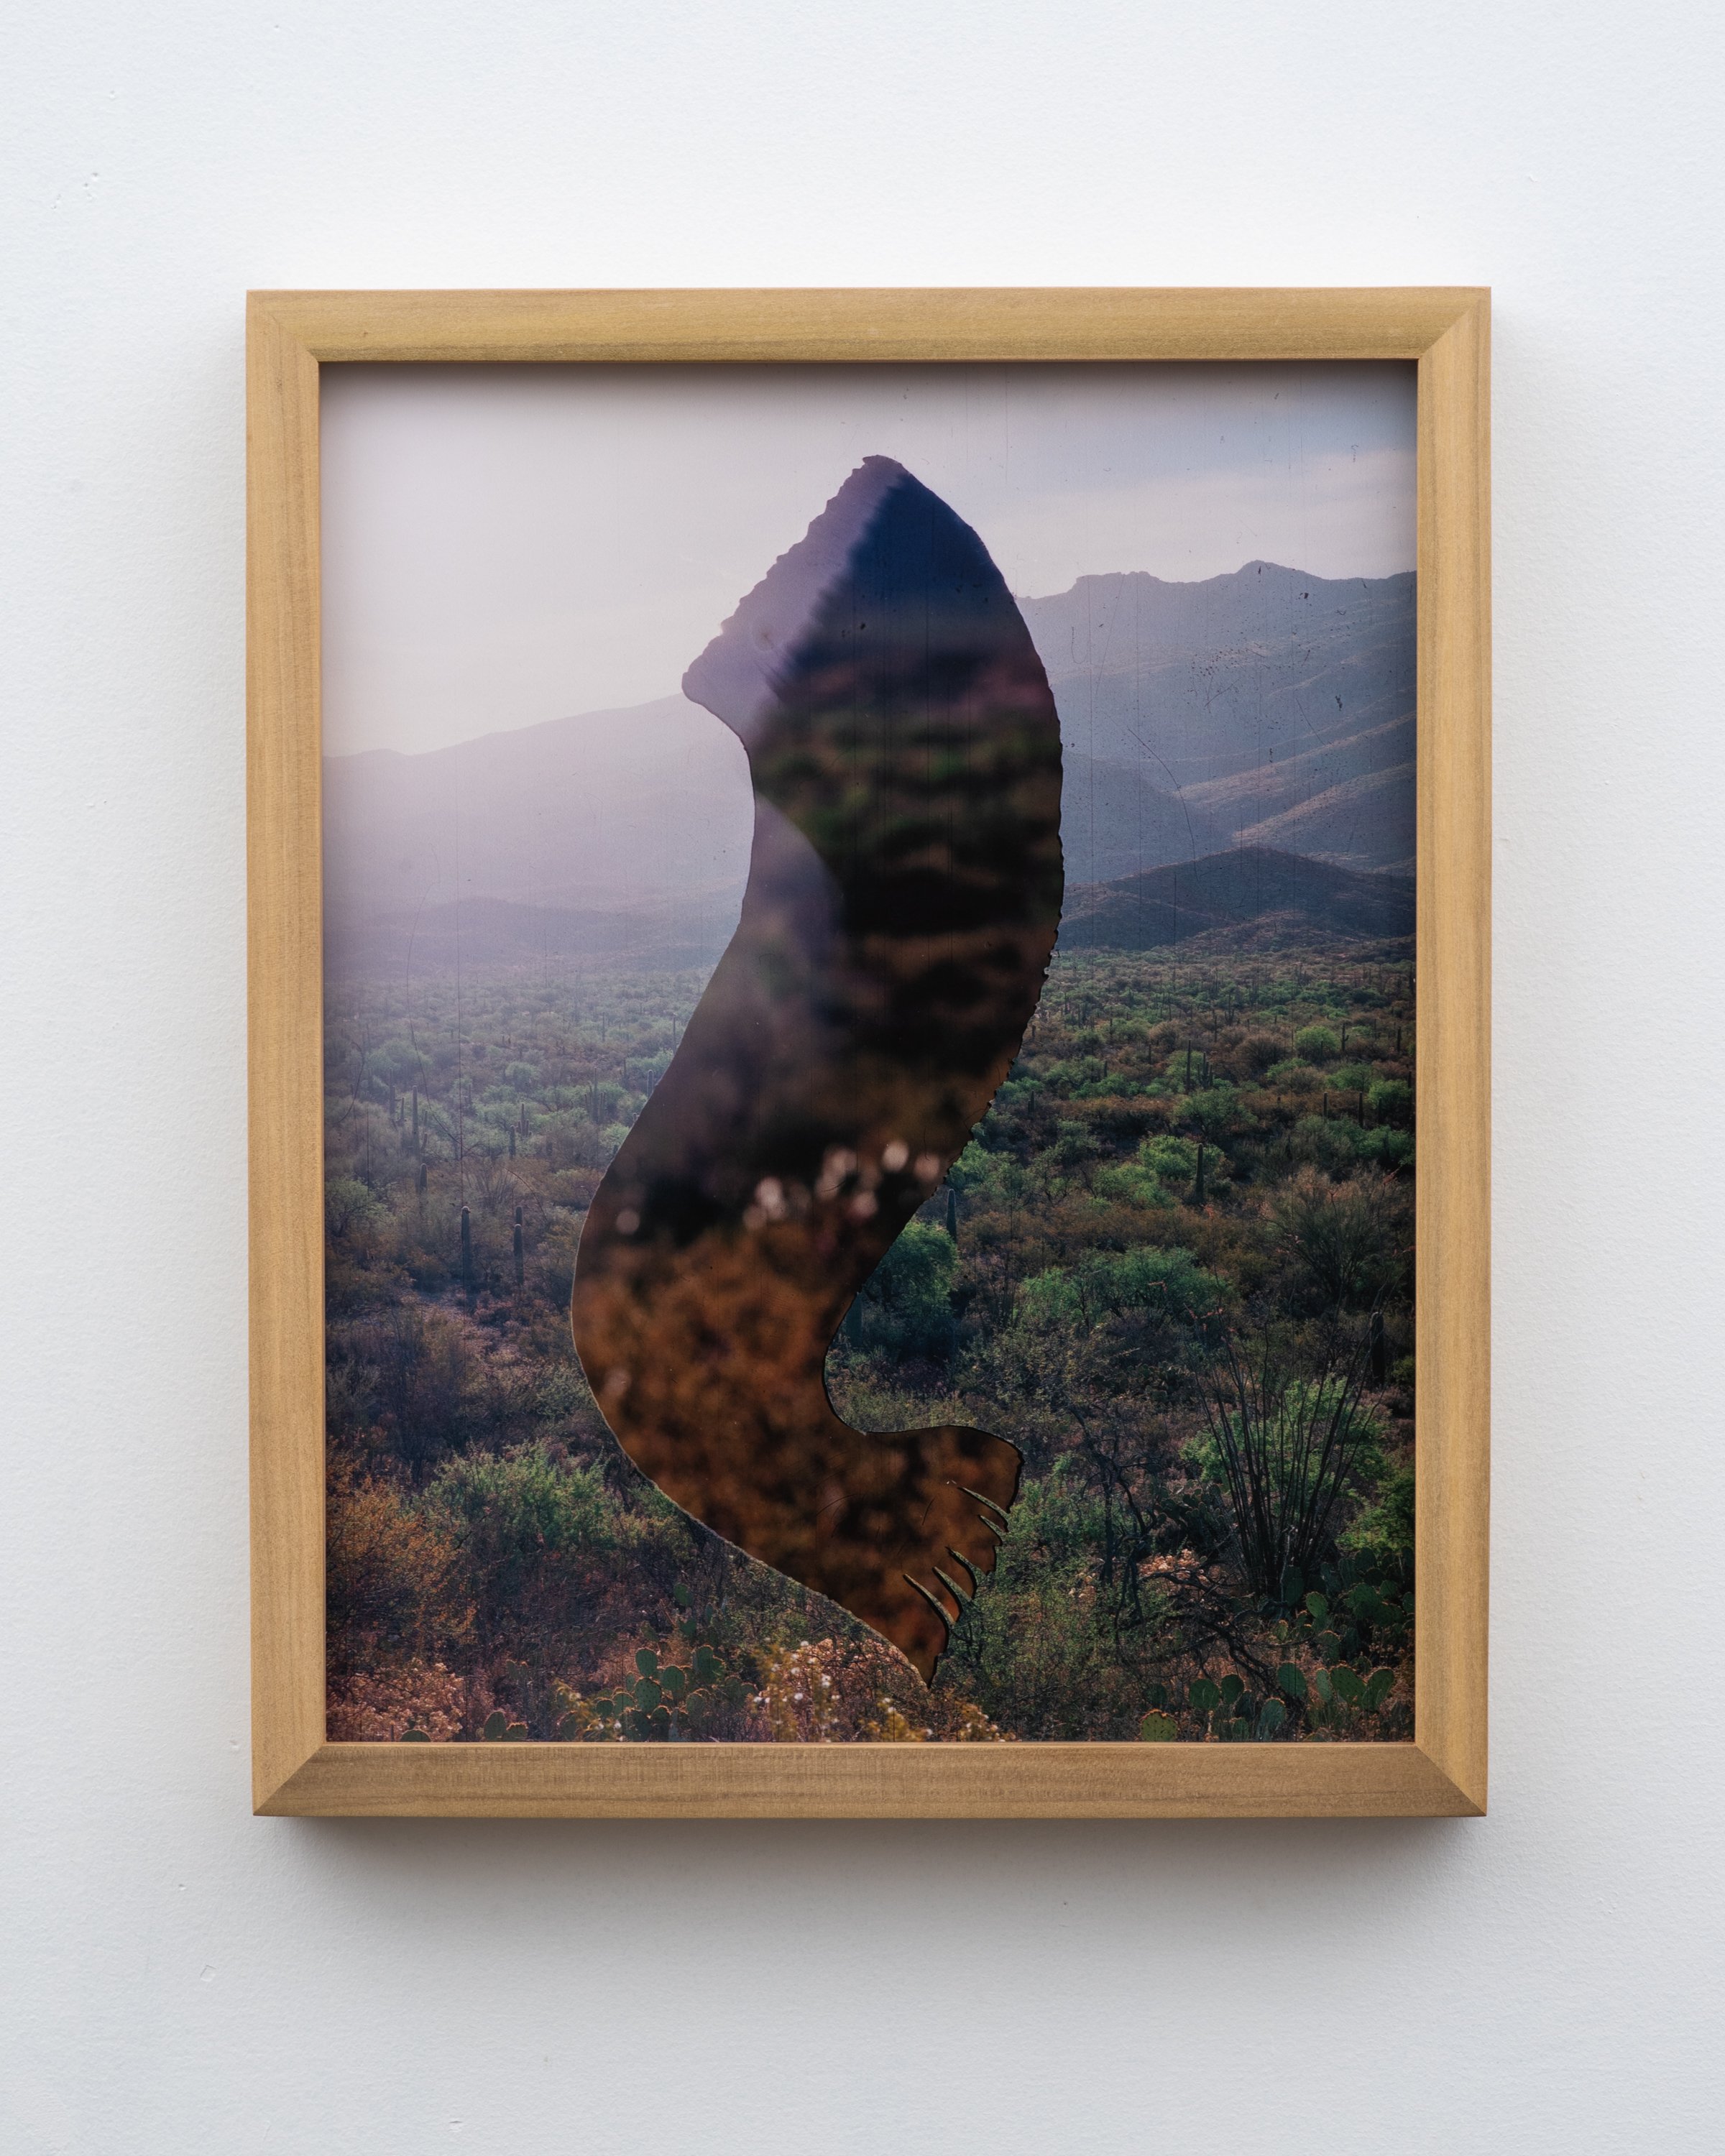   Analog Matte #155 (Cactus Forest) , 2023  Large format photograph, artist-made frame  12” x 15”  Edition of 10+AP 